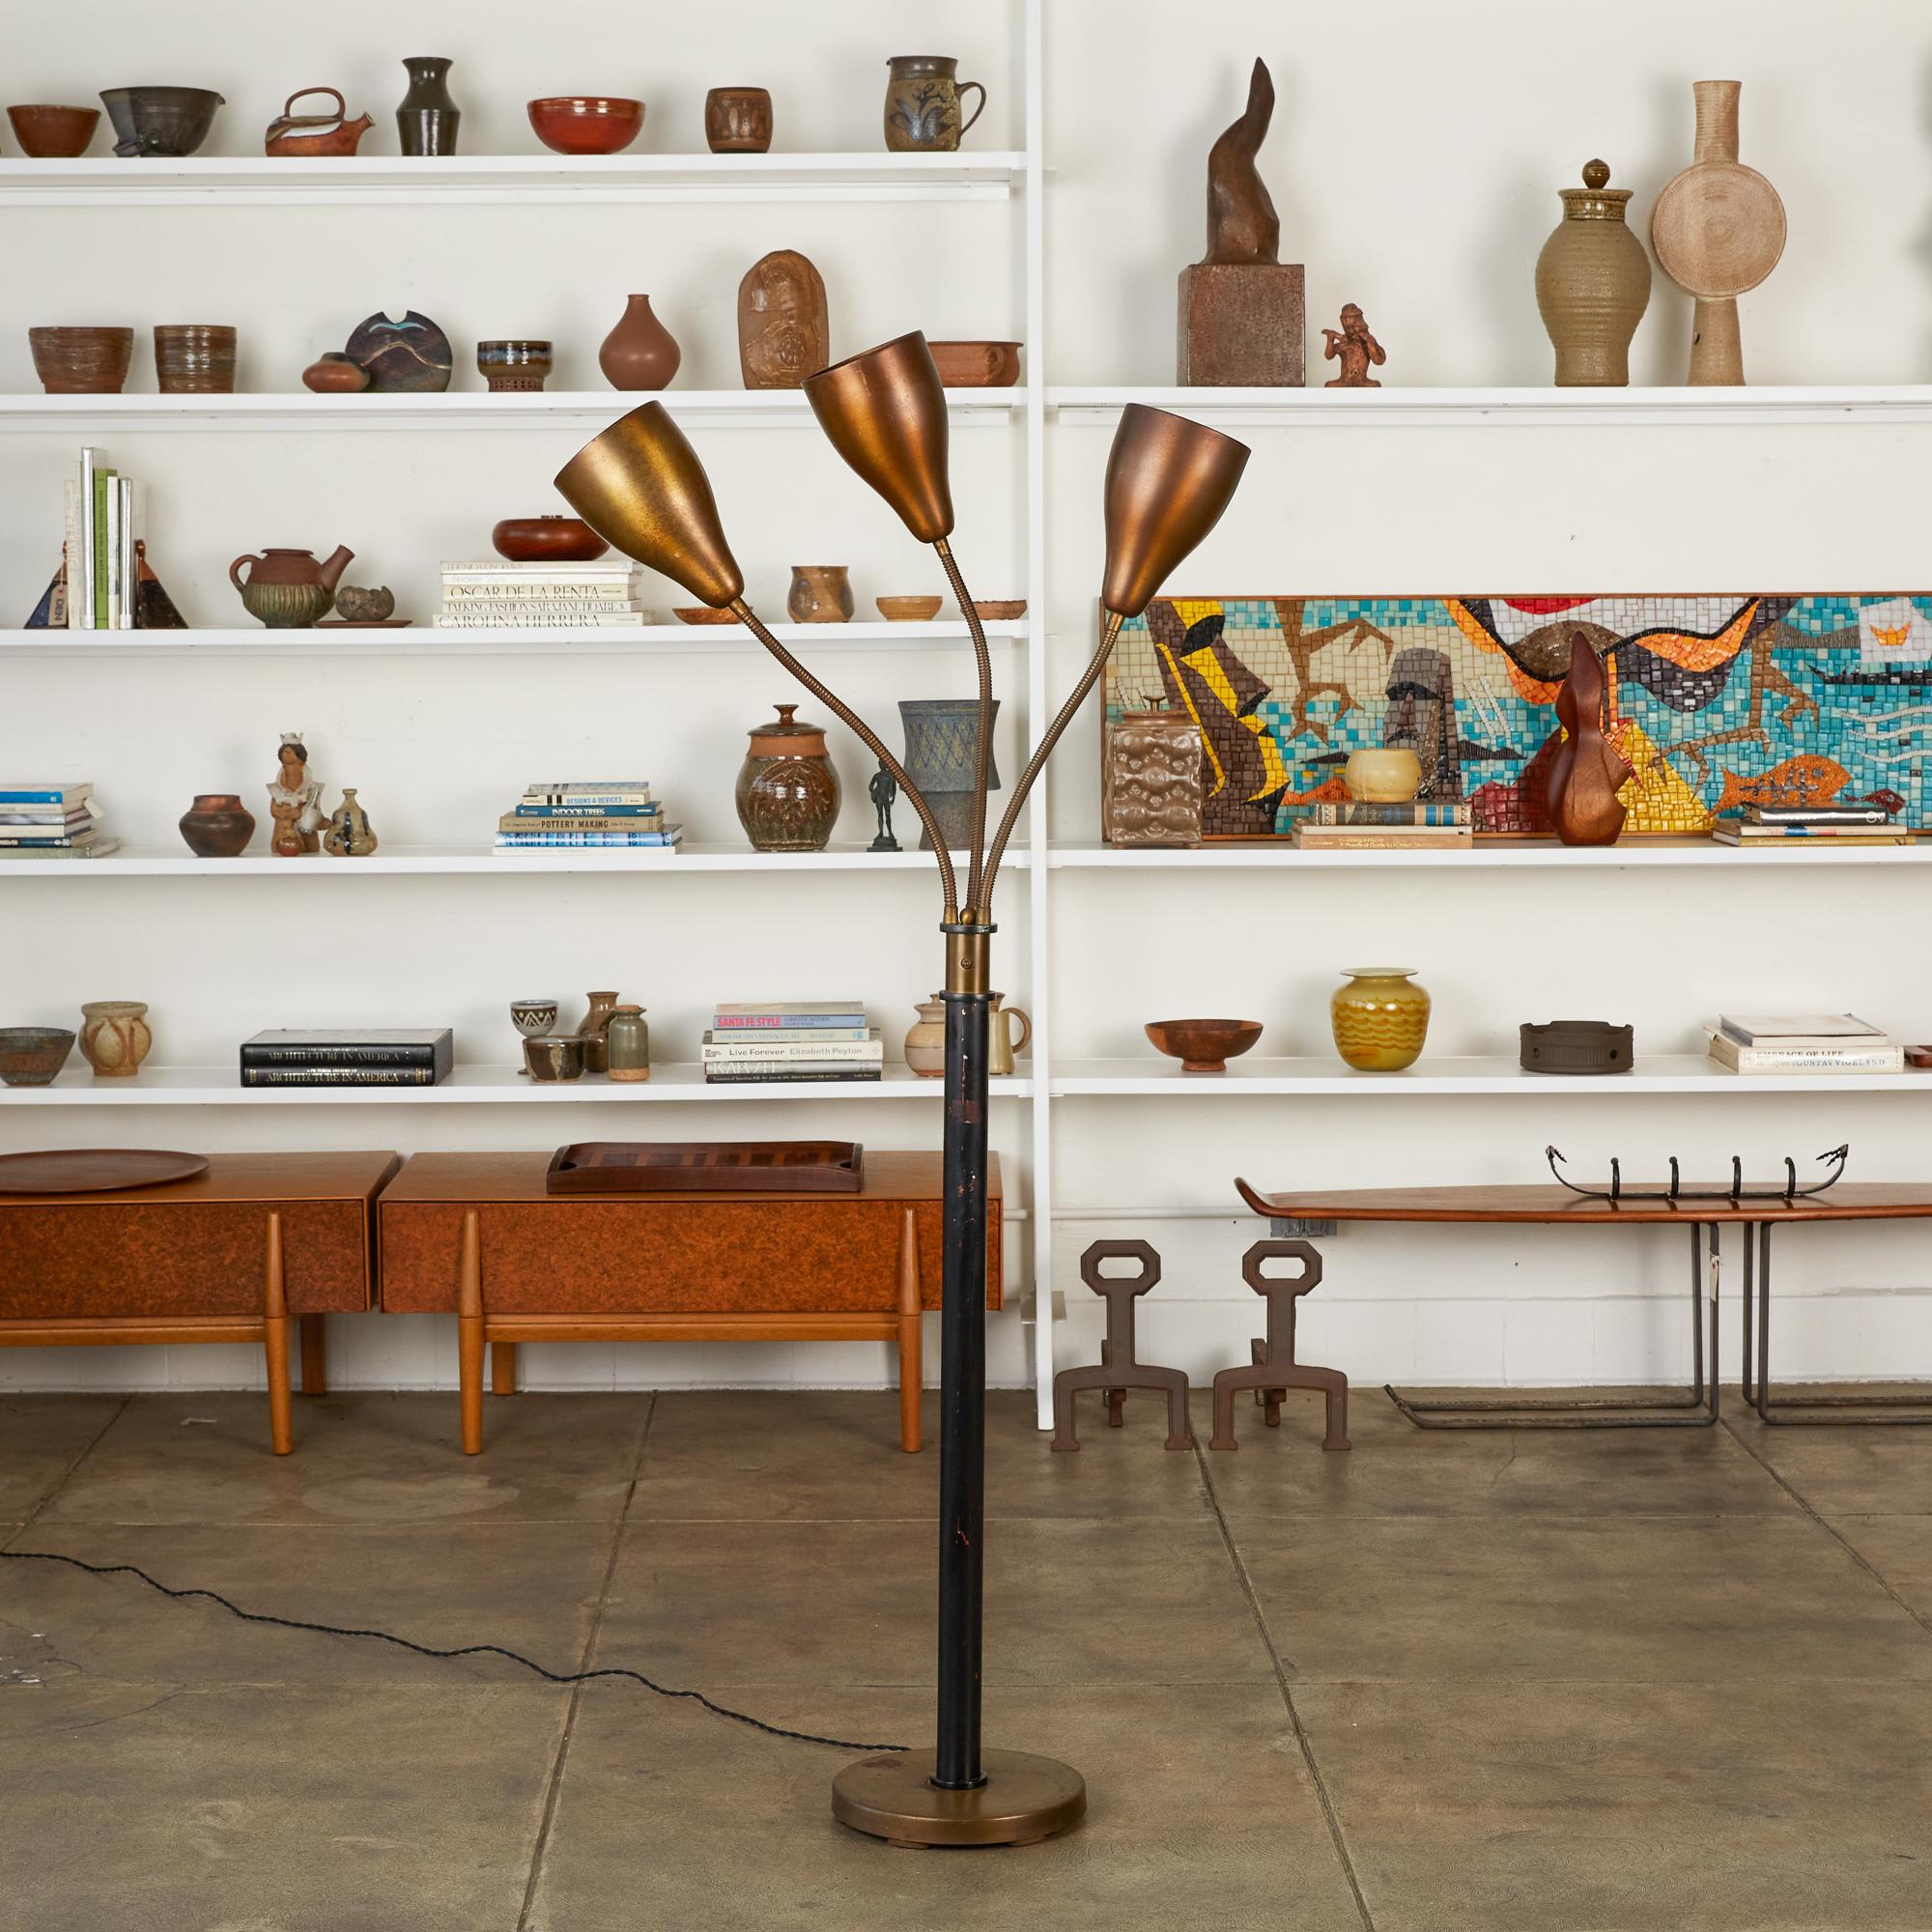 Greta Grossman style three headed floor lamp by Los Angeles Modernist lighting brand Marbro Lamp Company, circa 1950s. The lamp features three articulating gooseneck arms with spun steel cone shades that are attached to a black painted metal stem